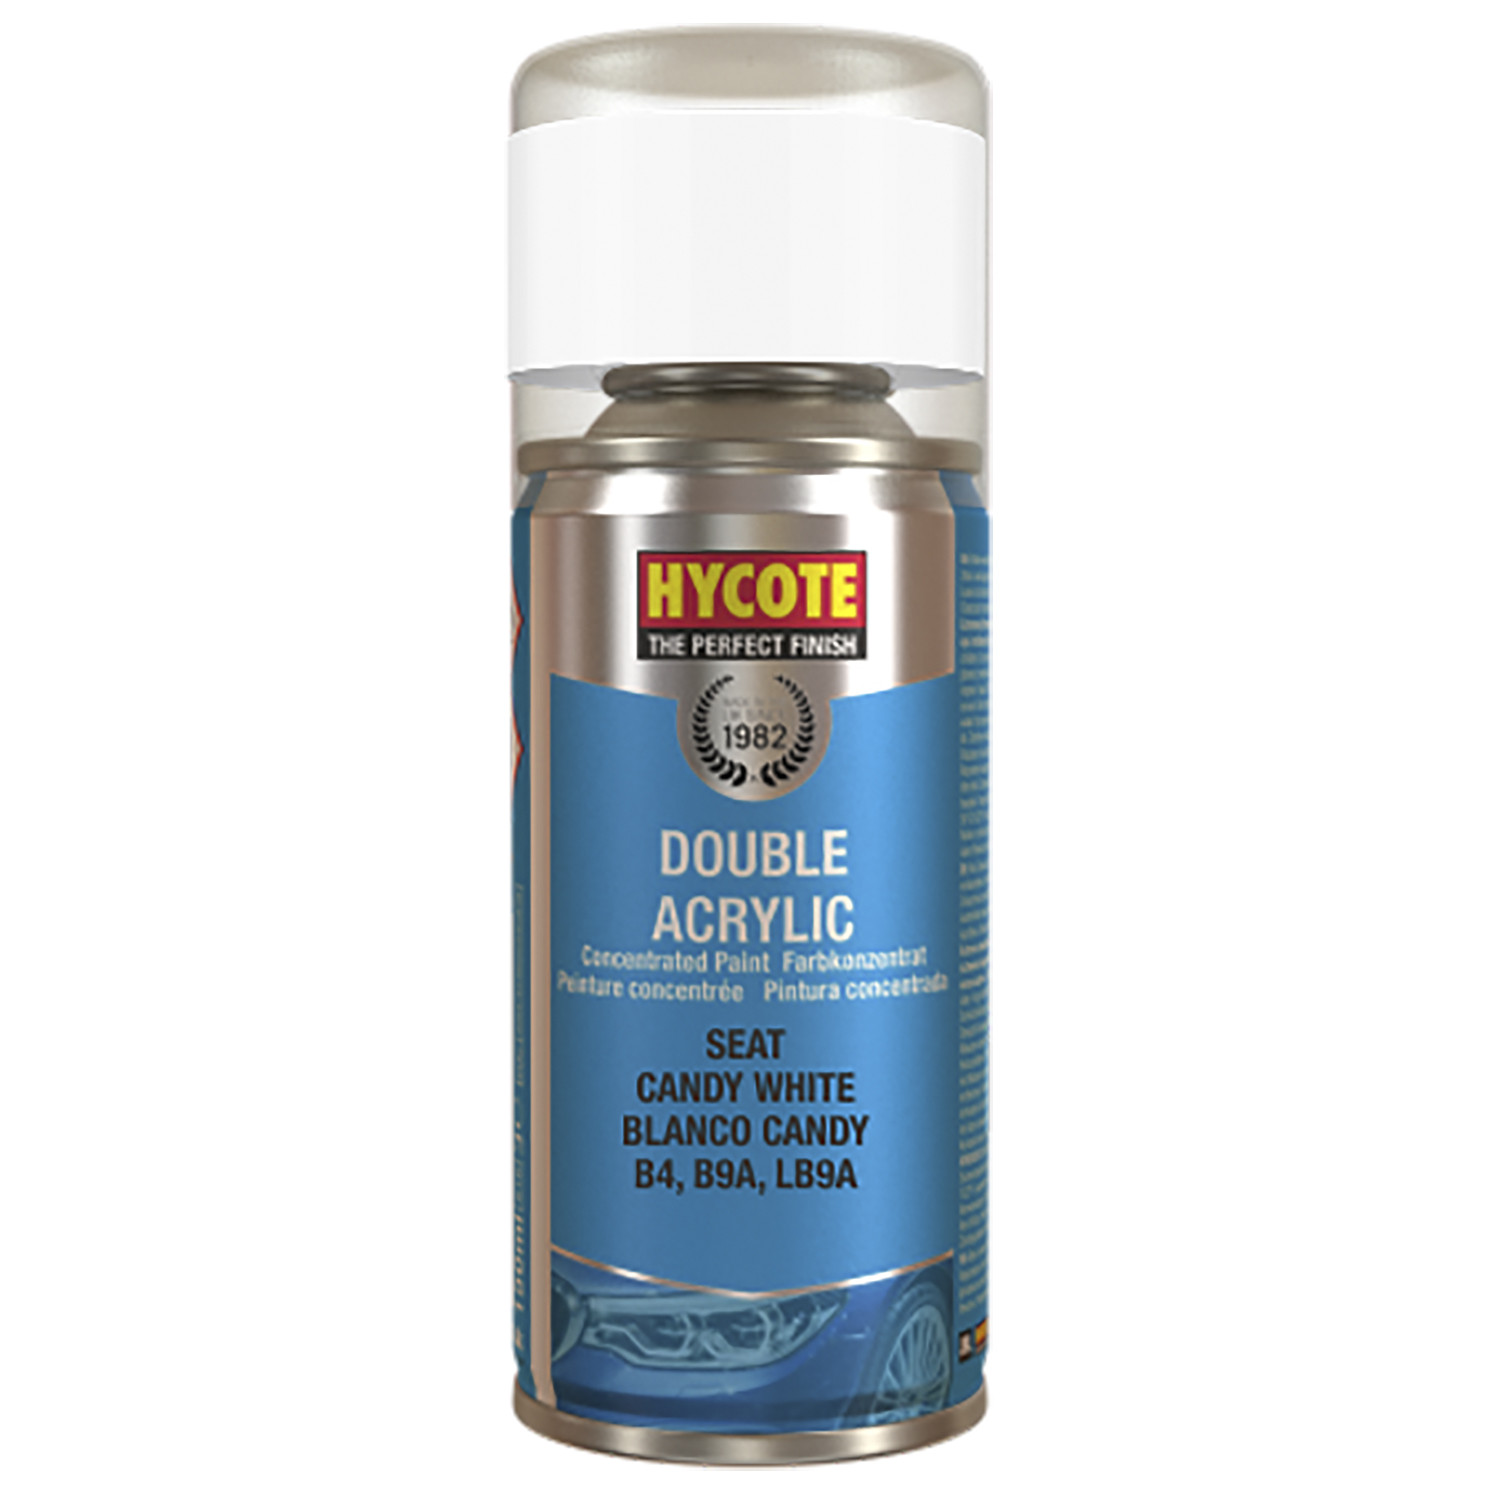 Hycote Renault Double Acrylic Paint - Black Star Image